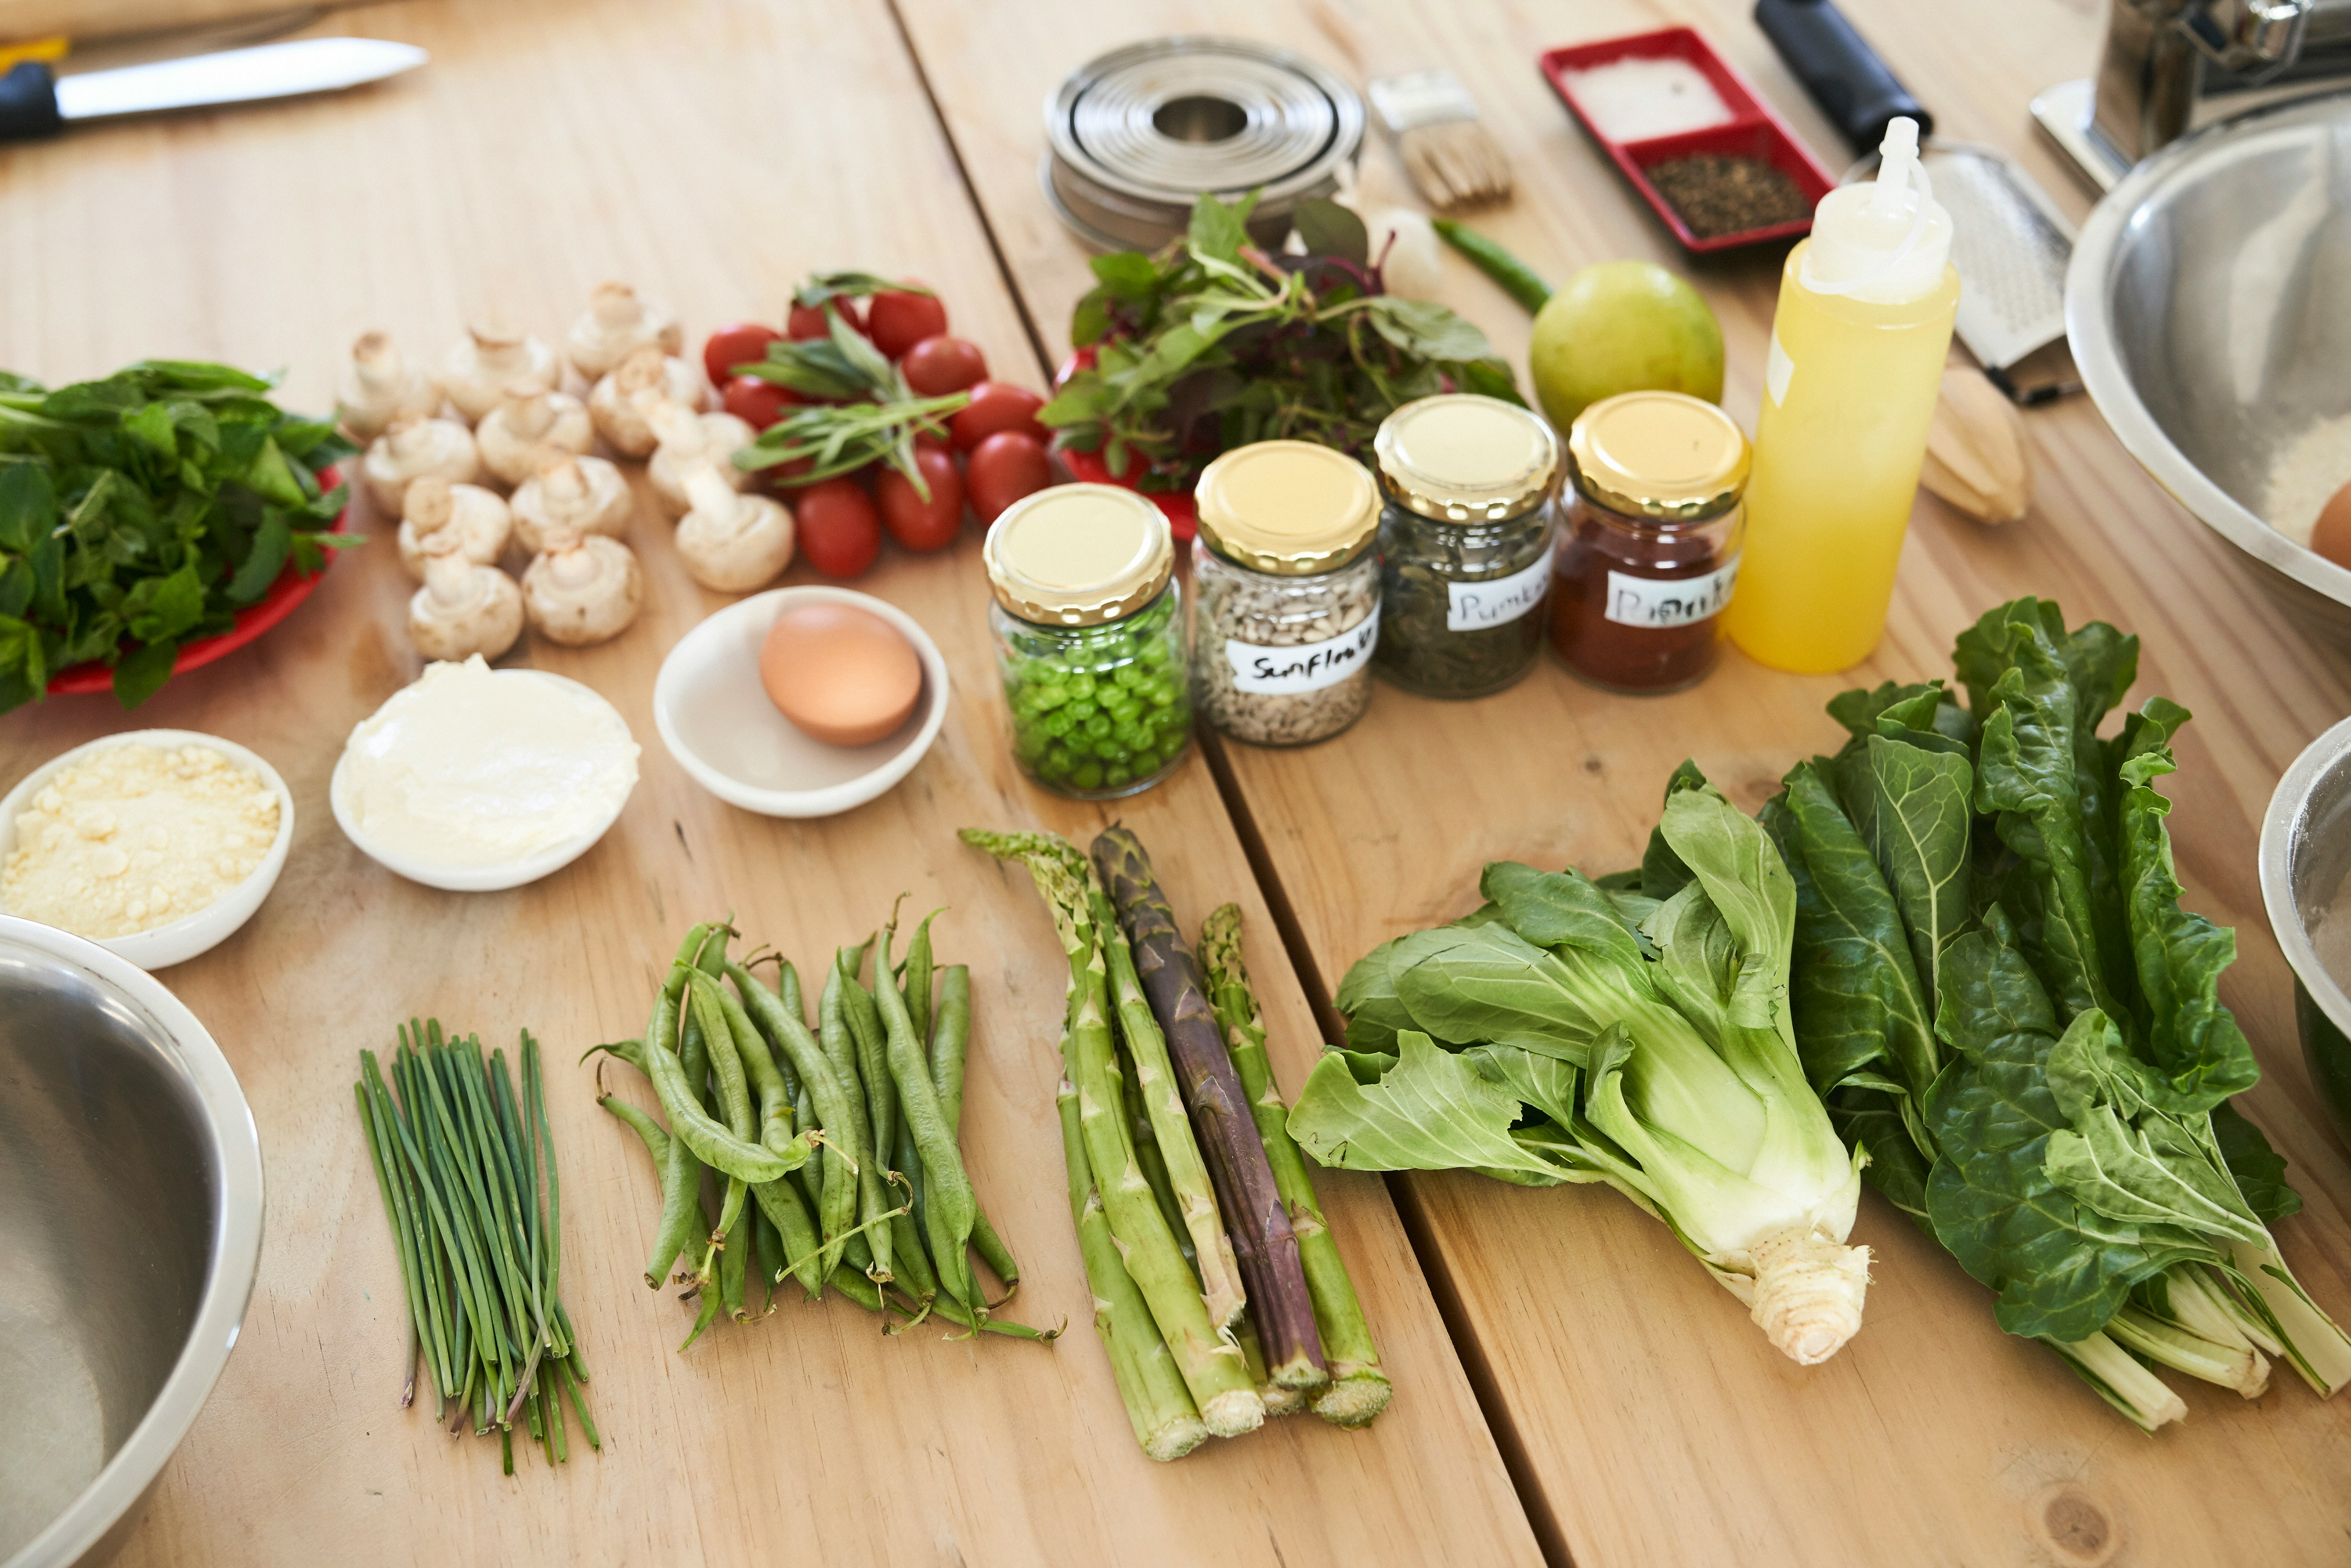 Green vegetables, an egg, tomatoes, and an oil laid out on a table for cooking.